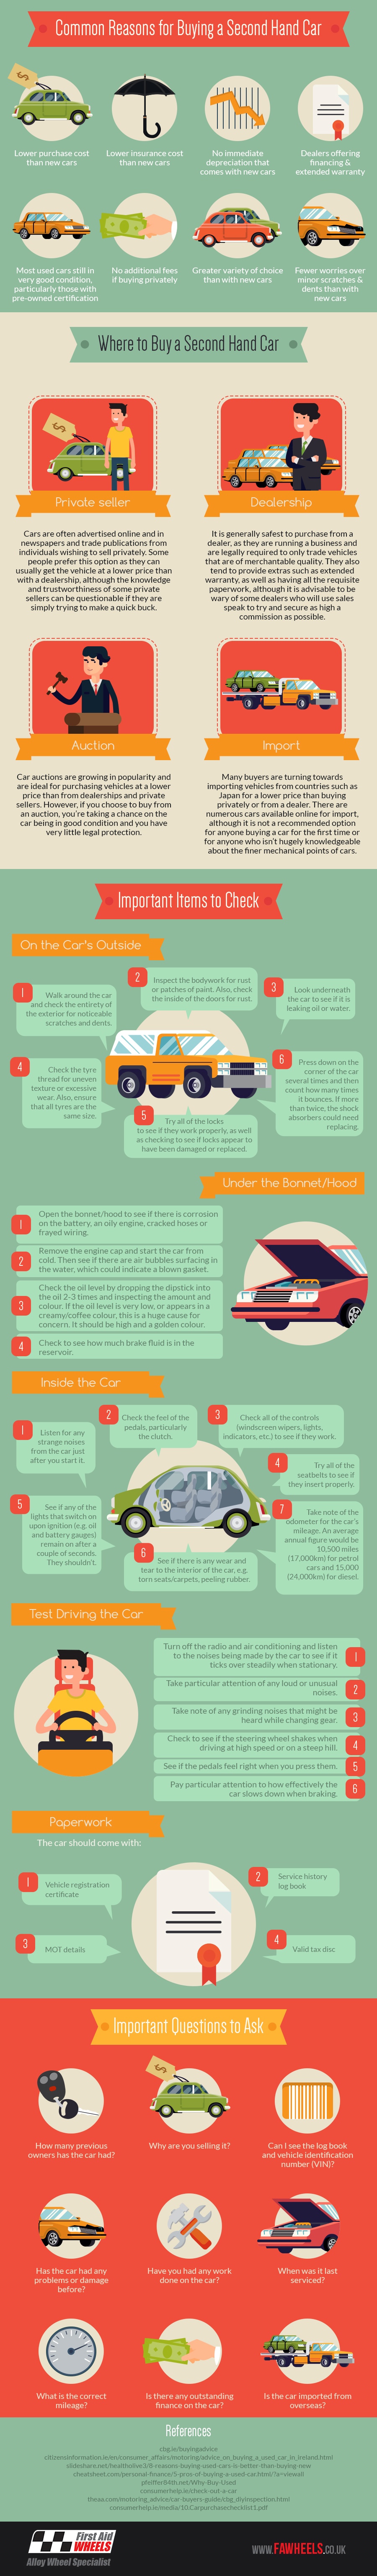 a-second-hand-car-buyers-guide-cropped_mark_dressekie